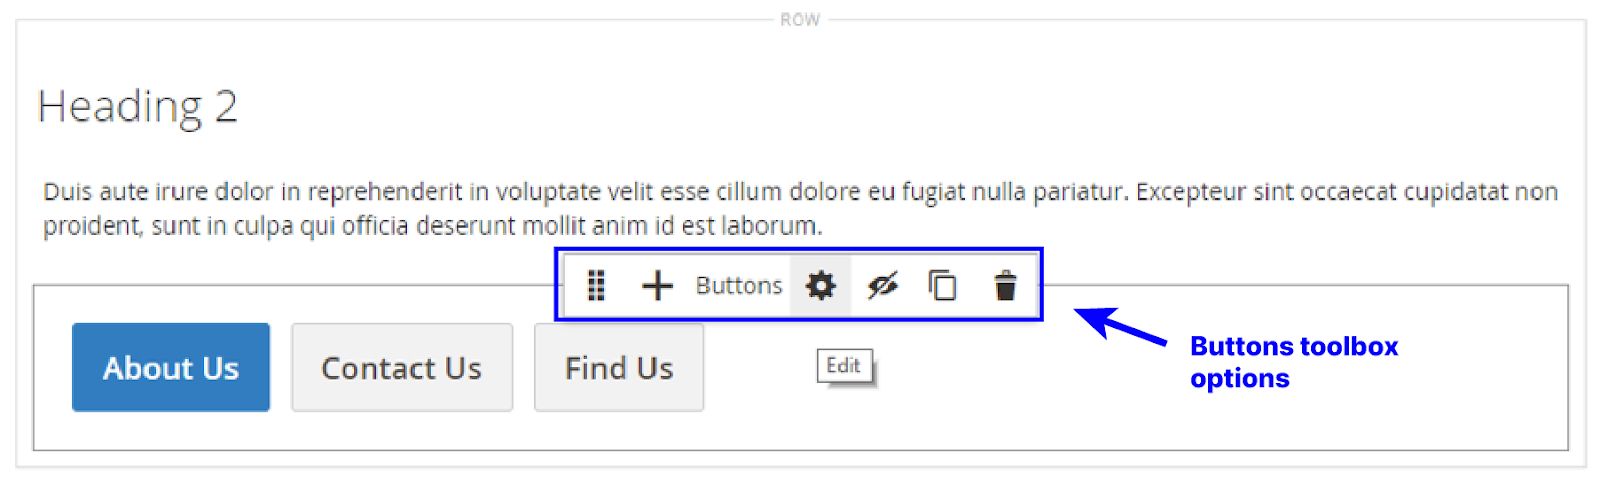 Buttons toolbox options in Magento Page Builder element